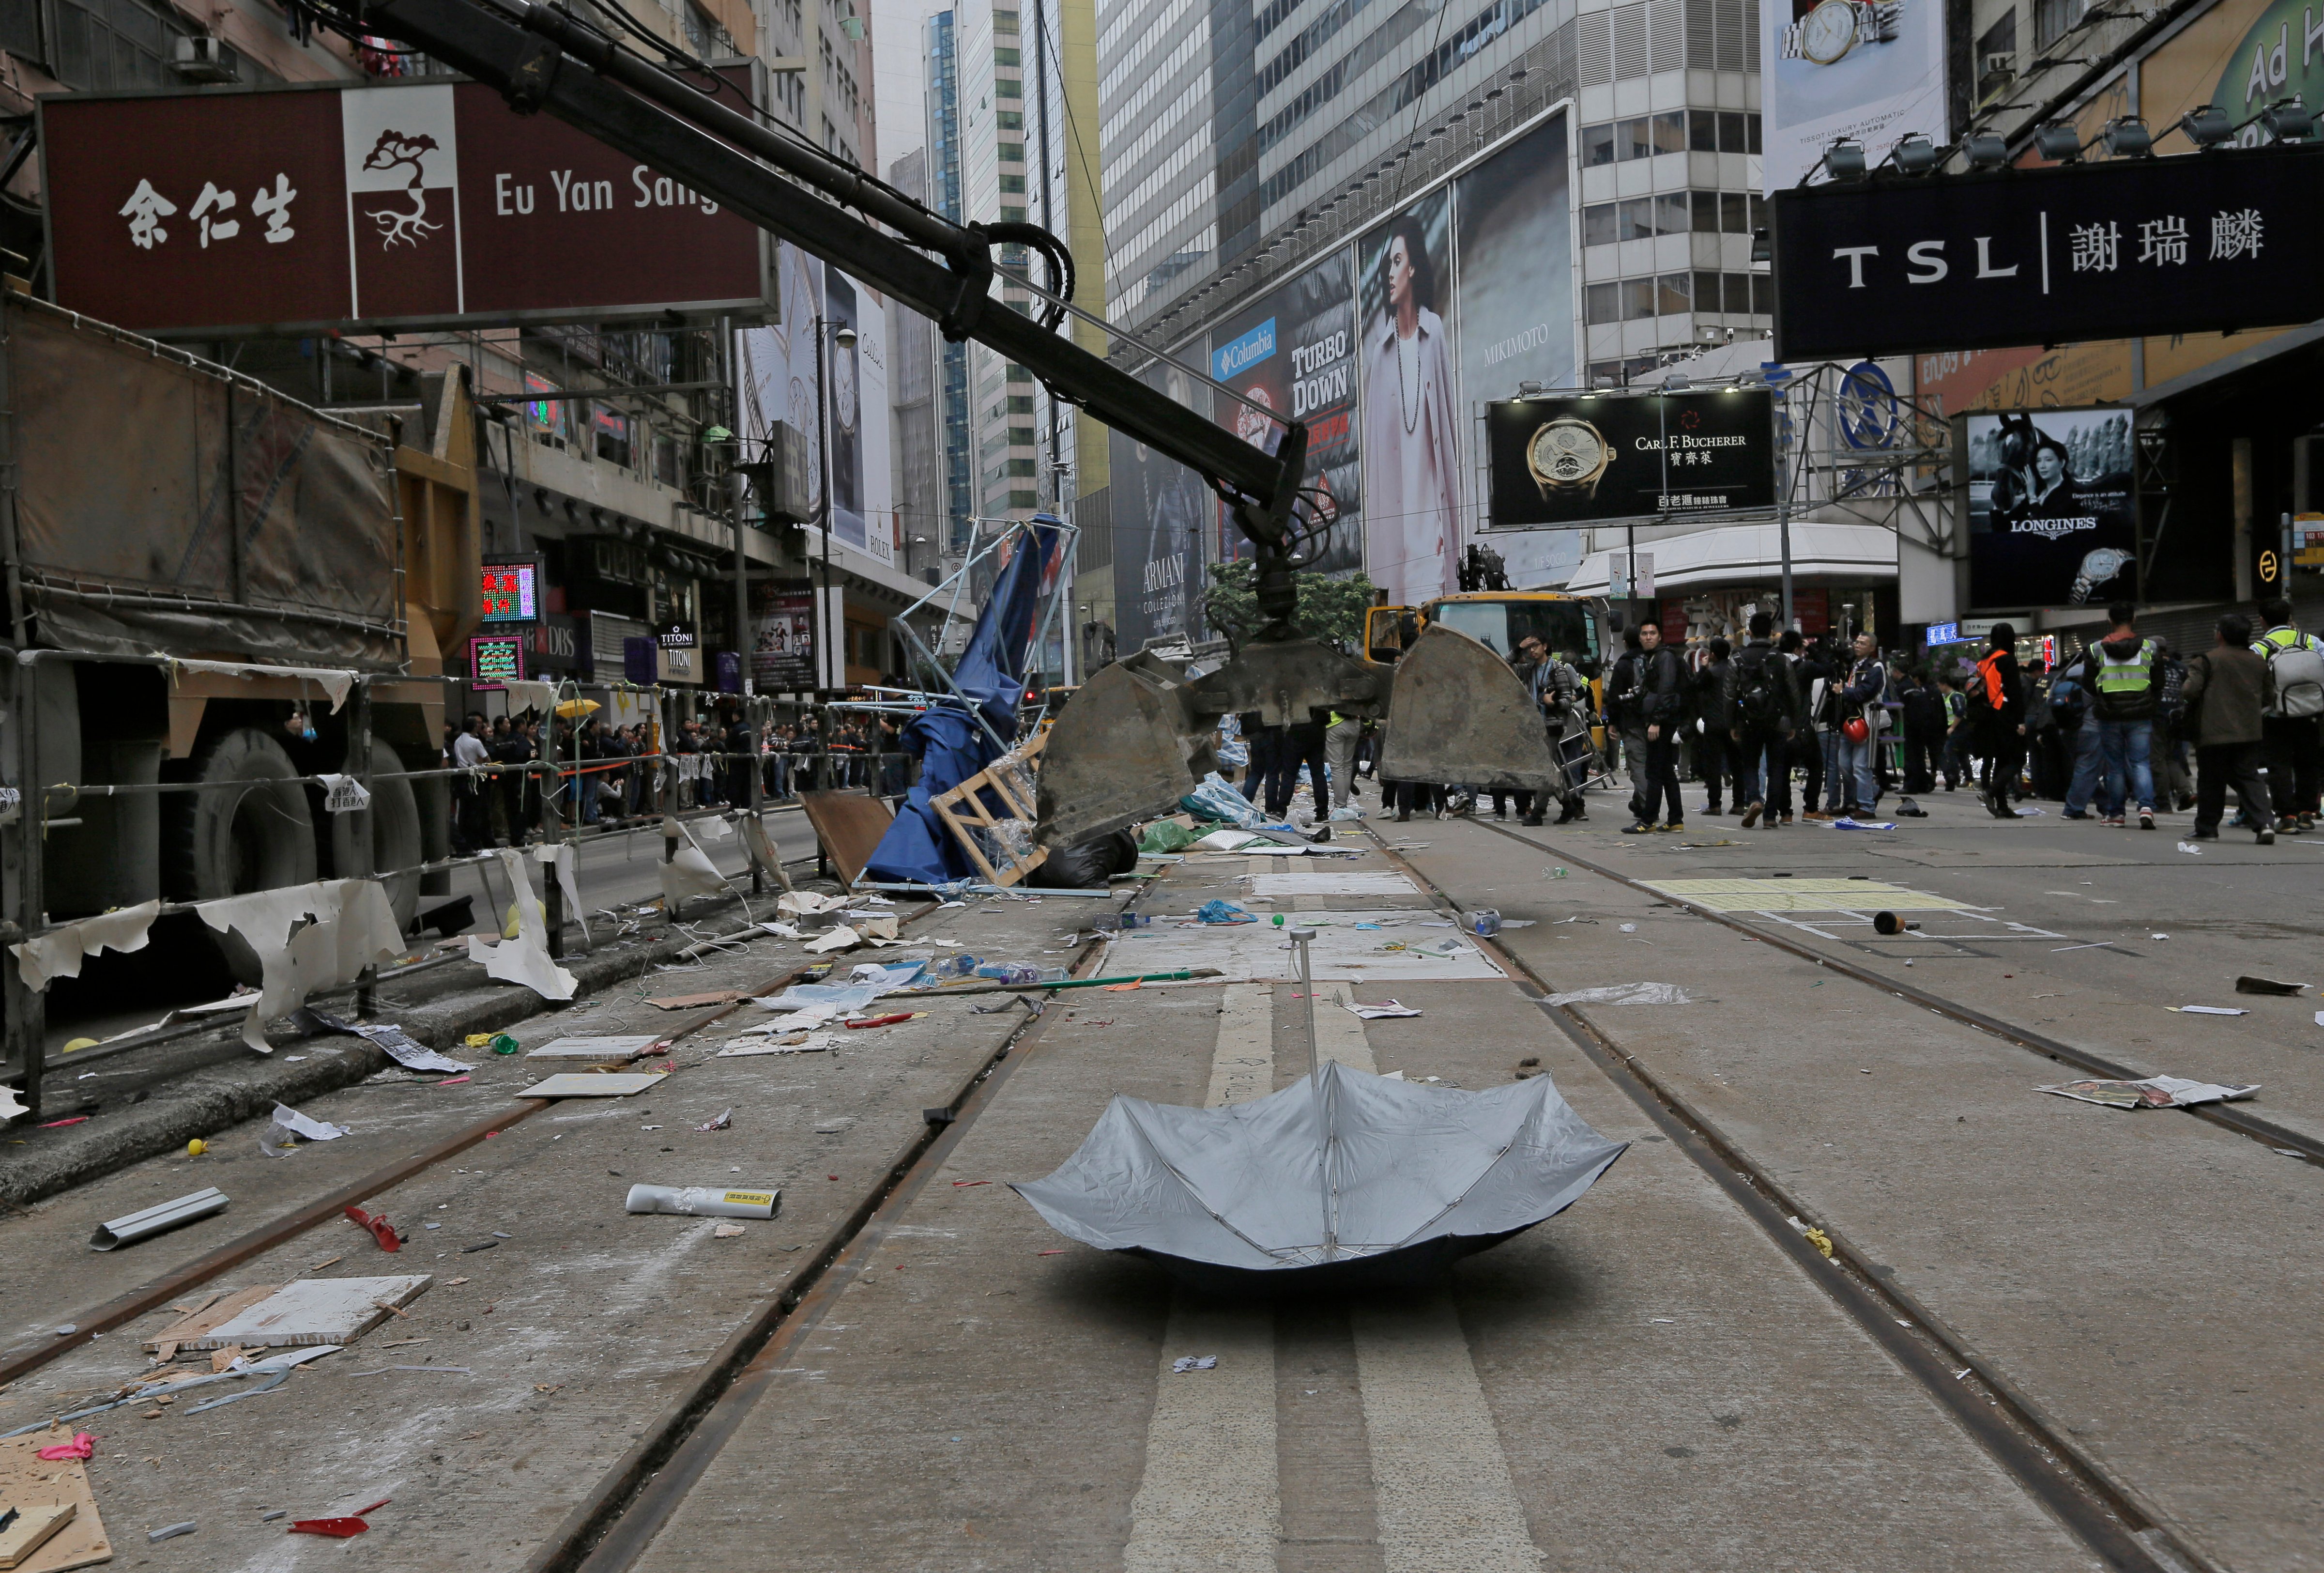 An excavation shovel is lowered to pick up an umbrella left behind by protesters as police clear barricades and tents on a main road in the occupied areas at Causeway Bay district in Hong Kong on Dec 15, 2014 (Vincent Yu—AP)